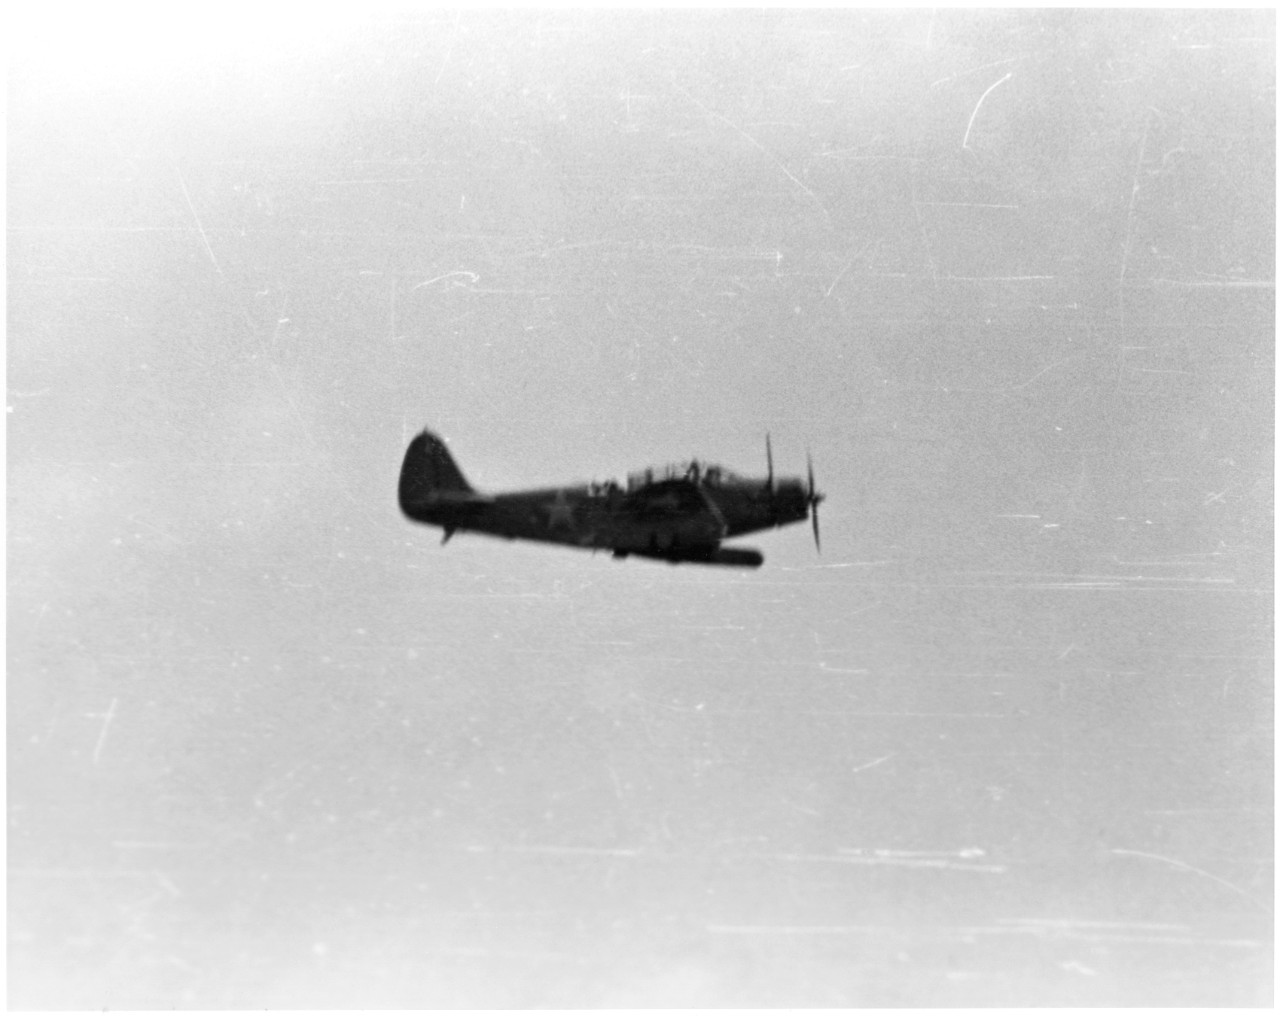 Photo #: 80-G-21668  Battle of Midway, June 1942